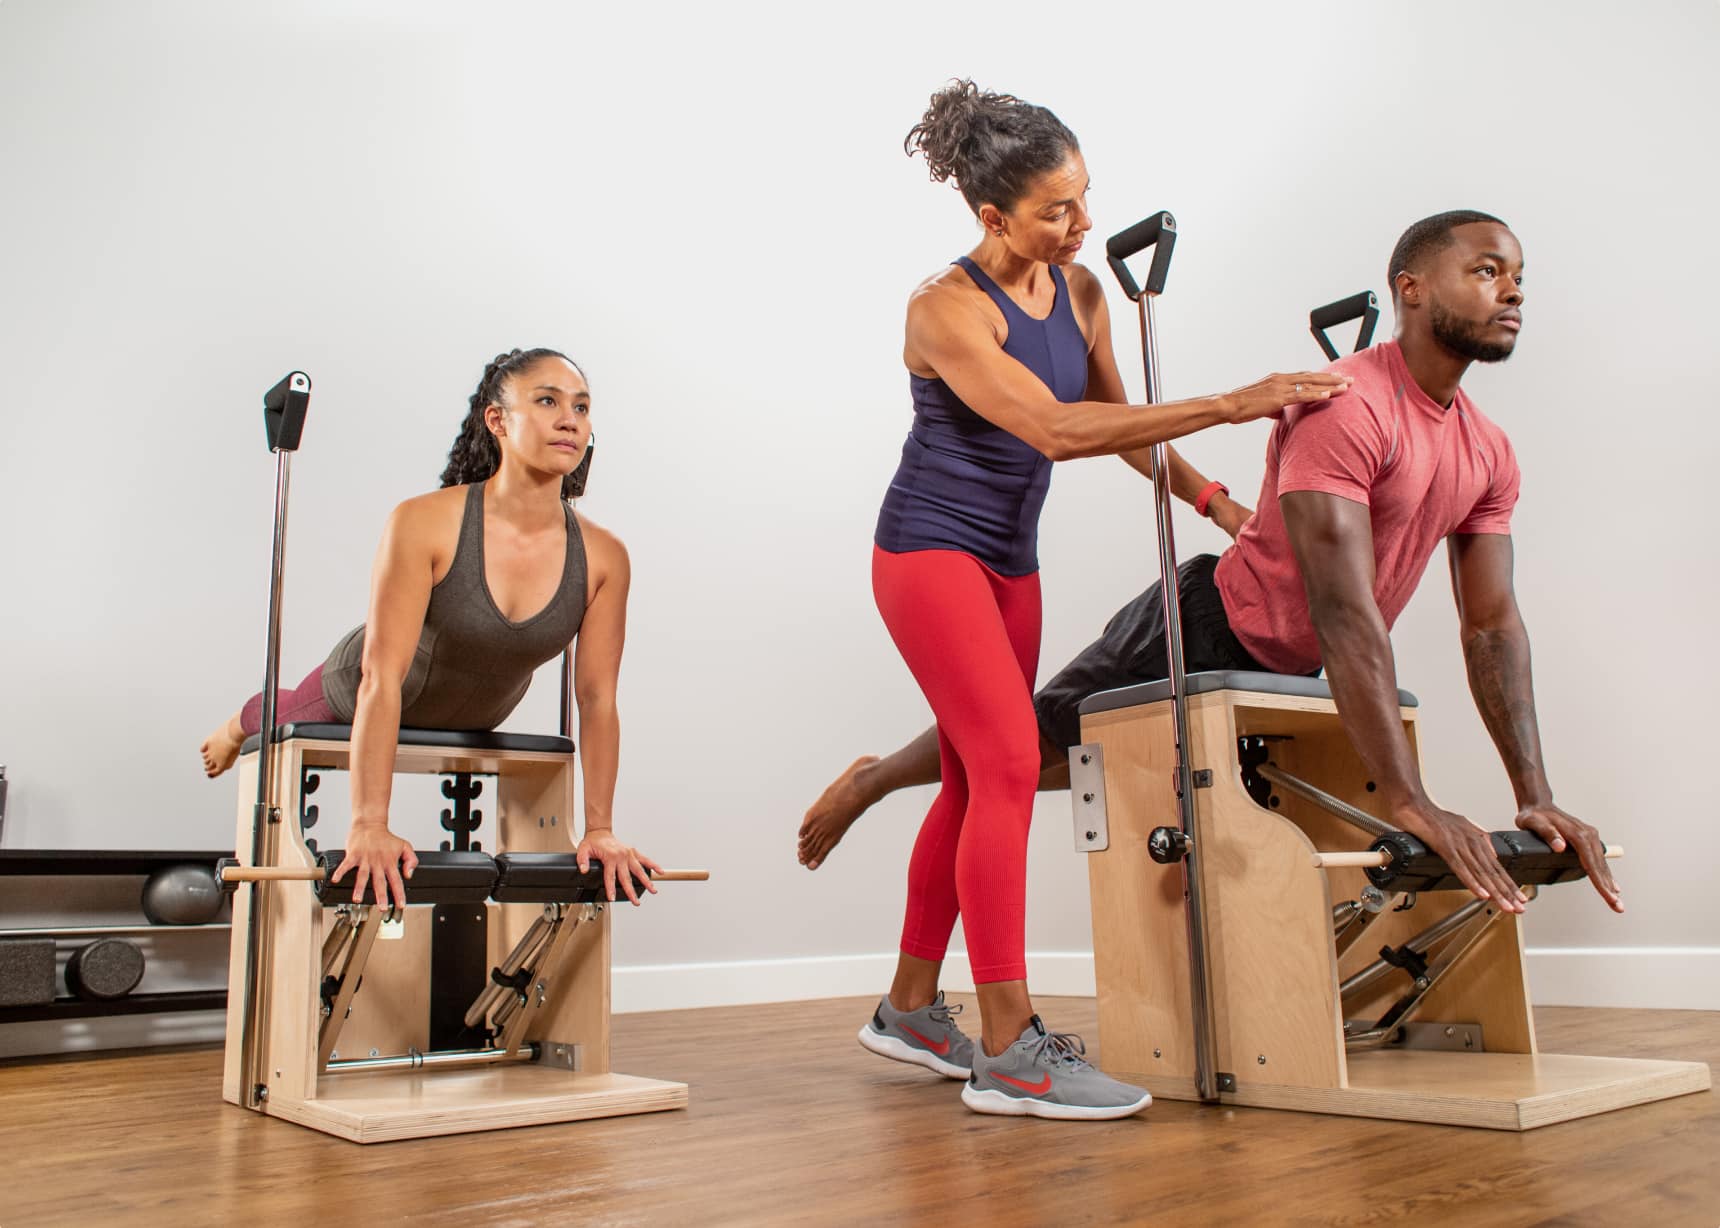 Pilates instructor assisting clients pushing their chest up while laying pelvis across a Pilates chair